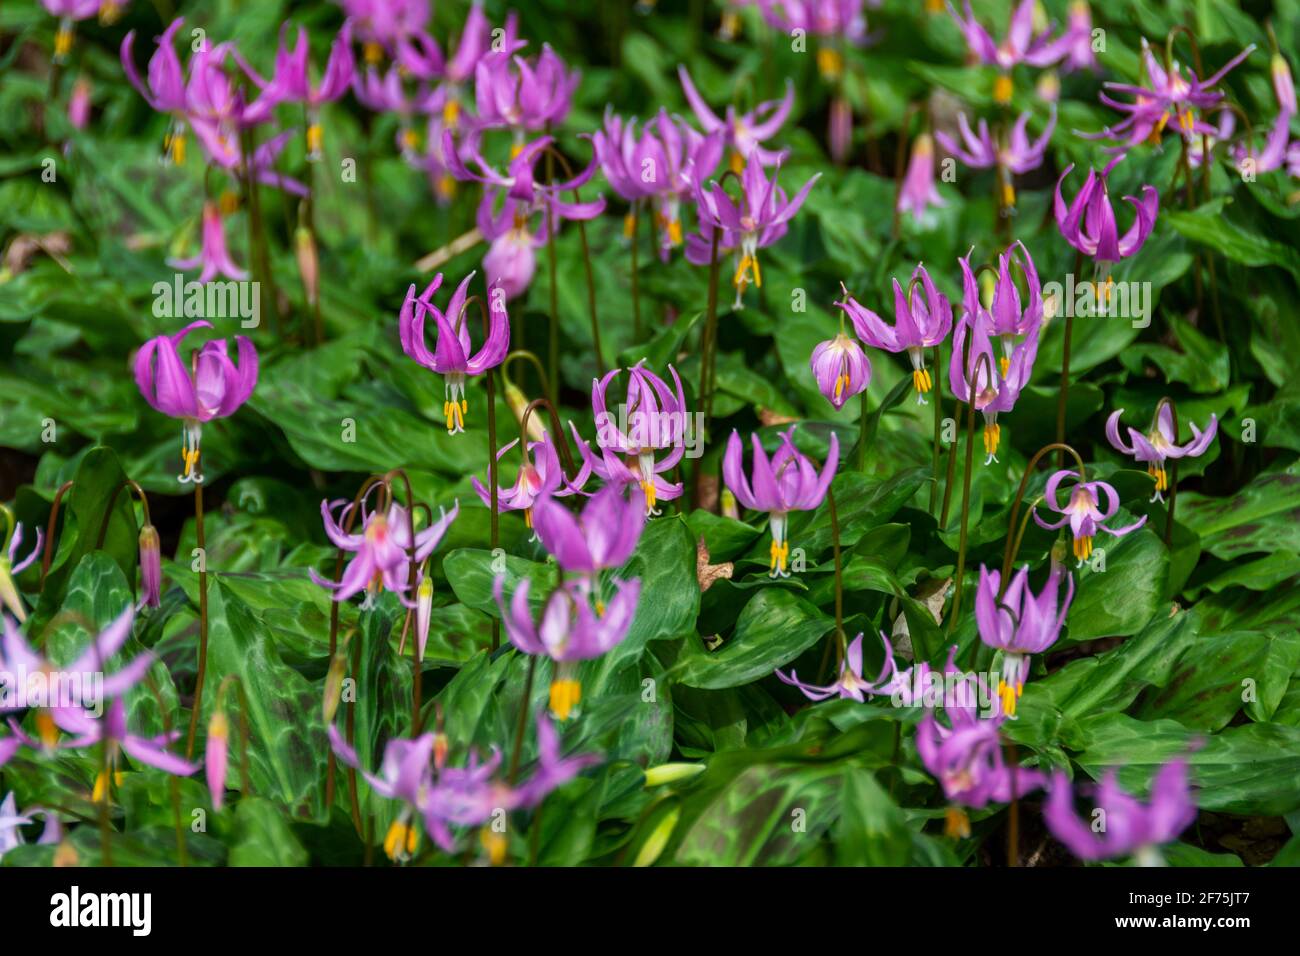 A patch of Erythronium Revolutum lilies in full flower Stock Photo